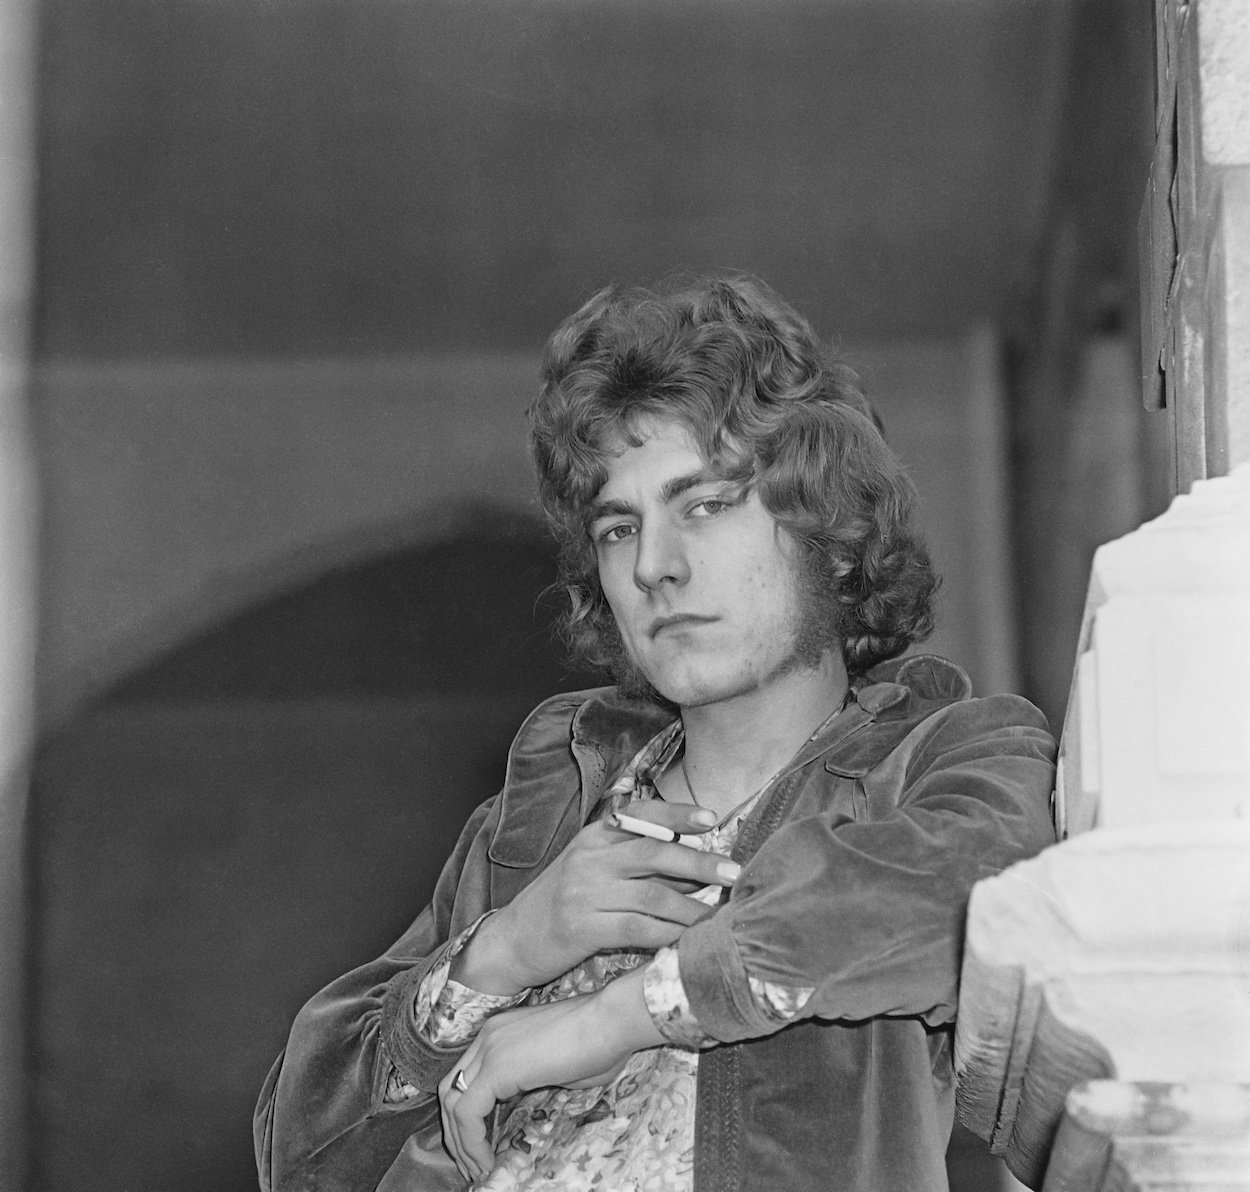 Robert Plant poses for a photo in 1968, a decade before he stopped using drugs by getting very frank with himself after a tragic loss.